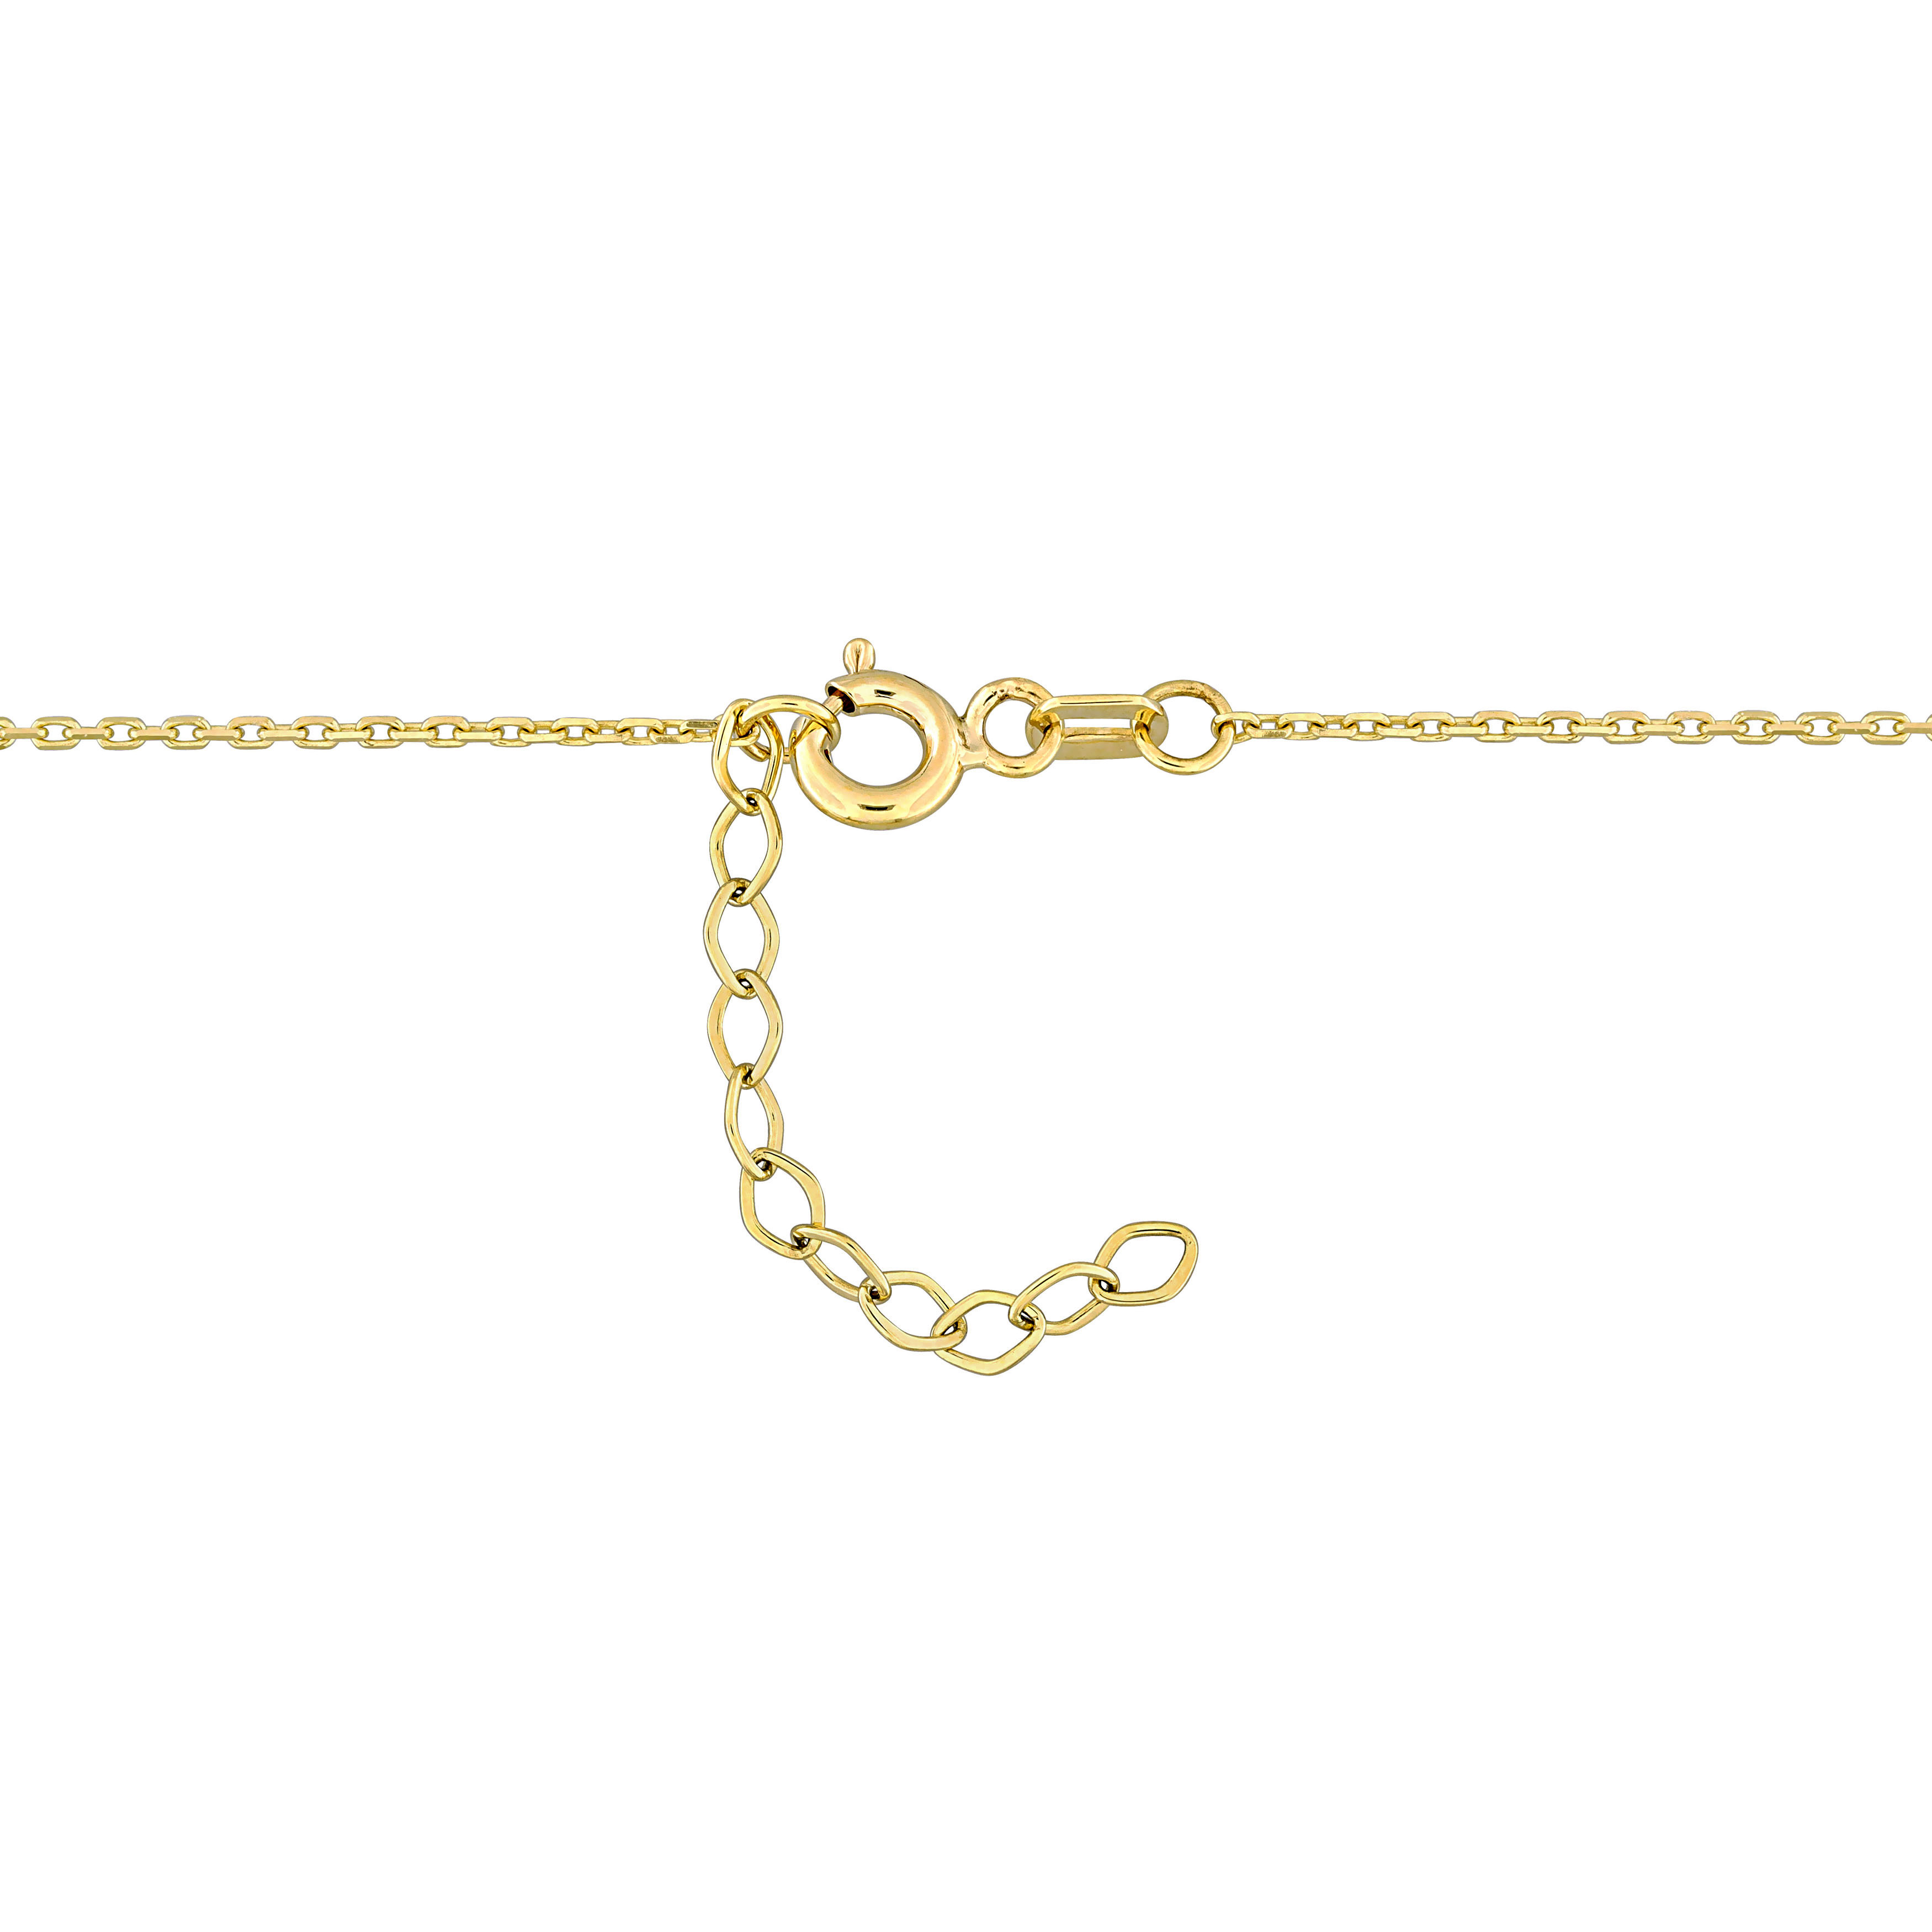 8-8.5 MM Cultured Freshwater Pearl Ball Station Lariant Necklace in 10k Yellow Gold - 16.5 in. + 1.5 in. extender